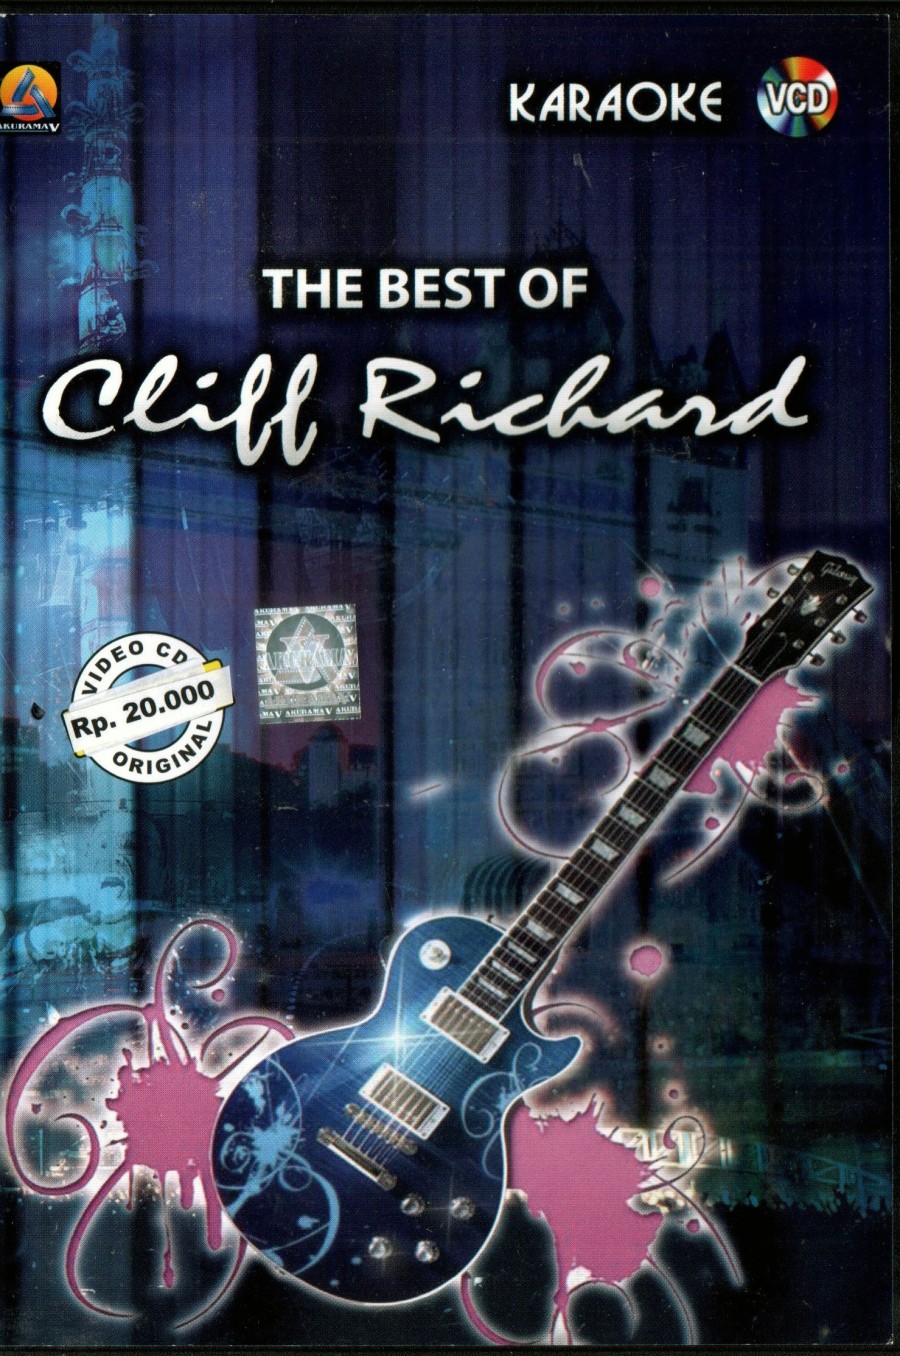 The best of Cliff Richard